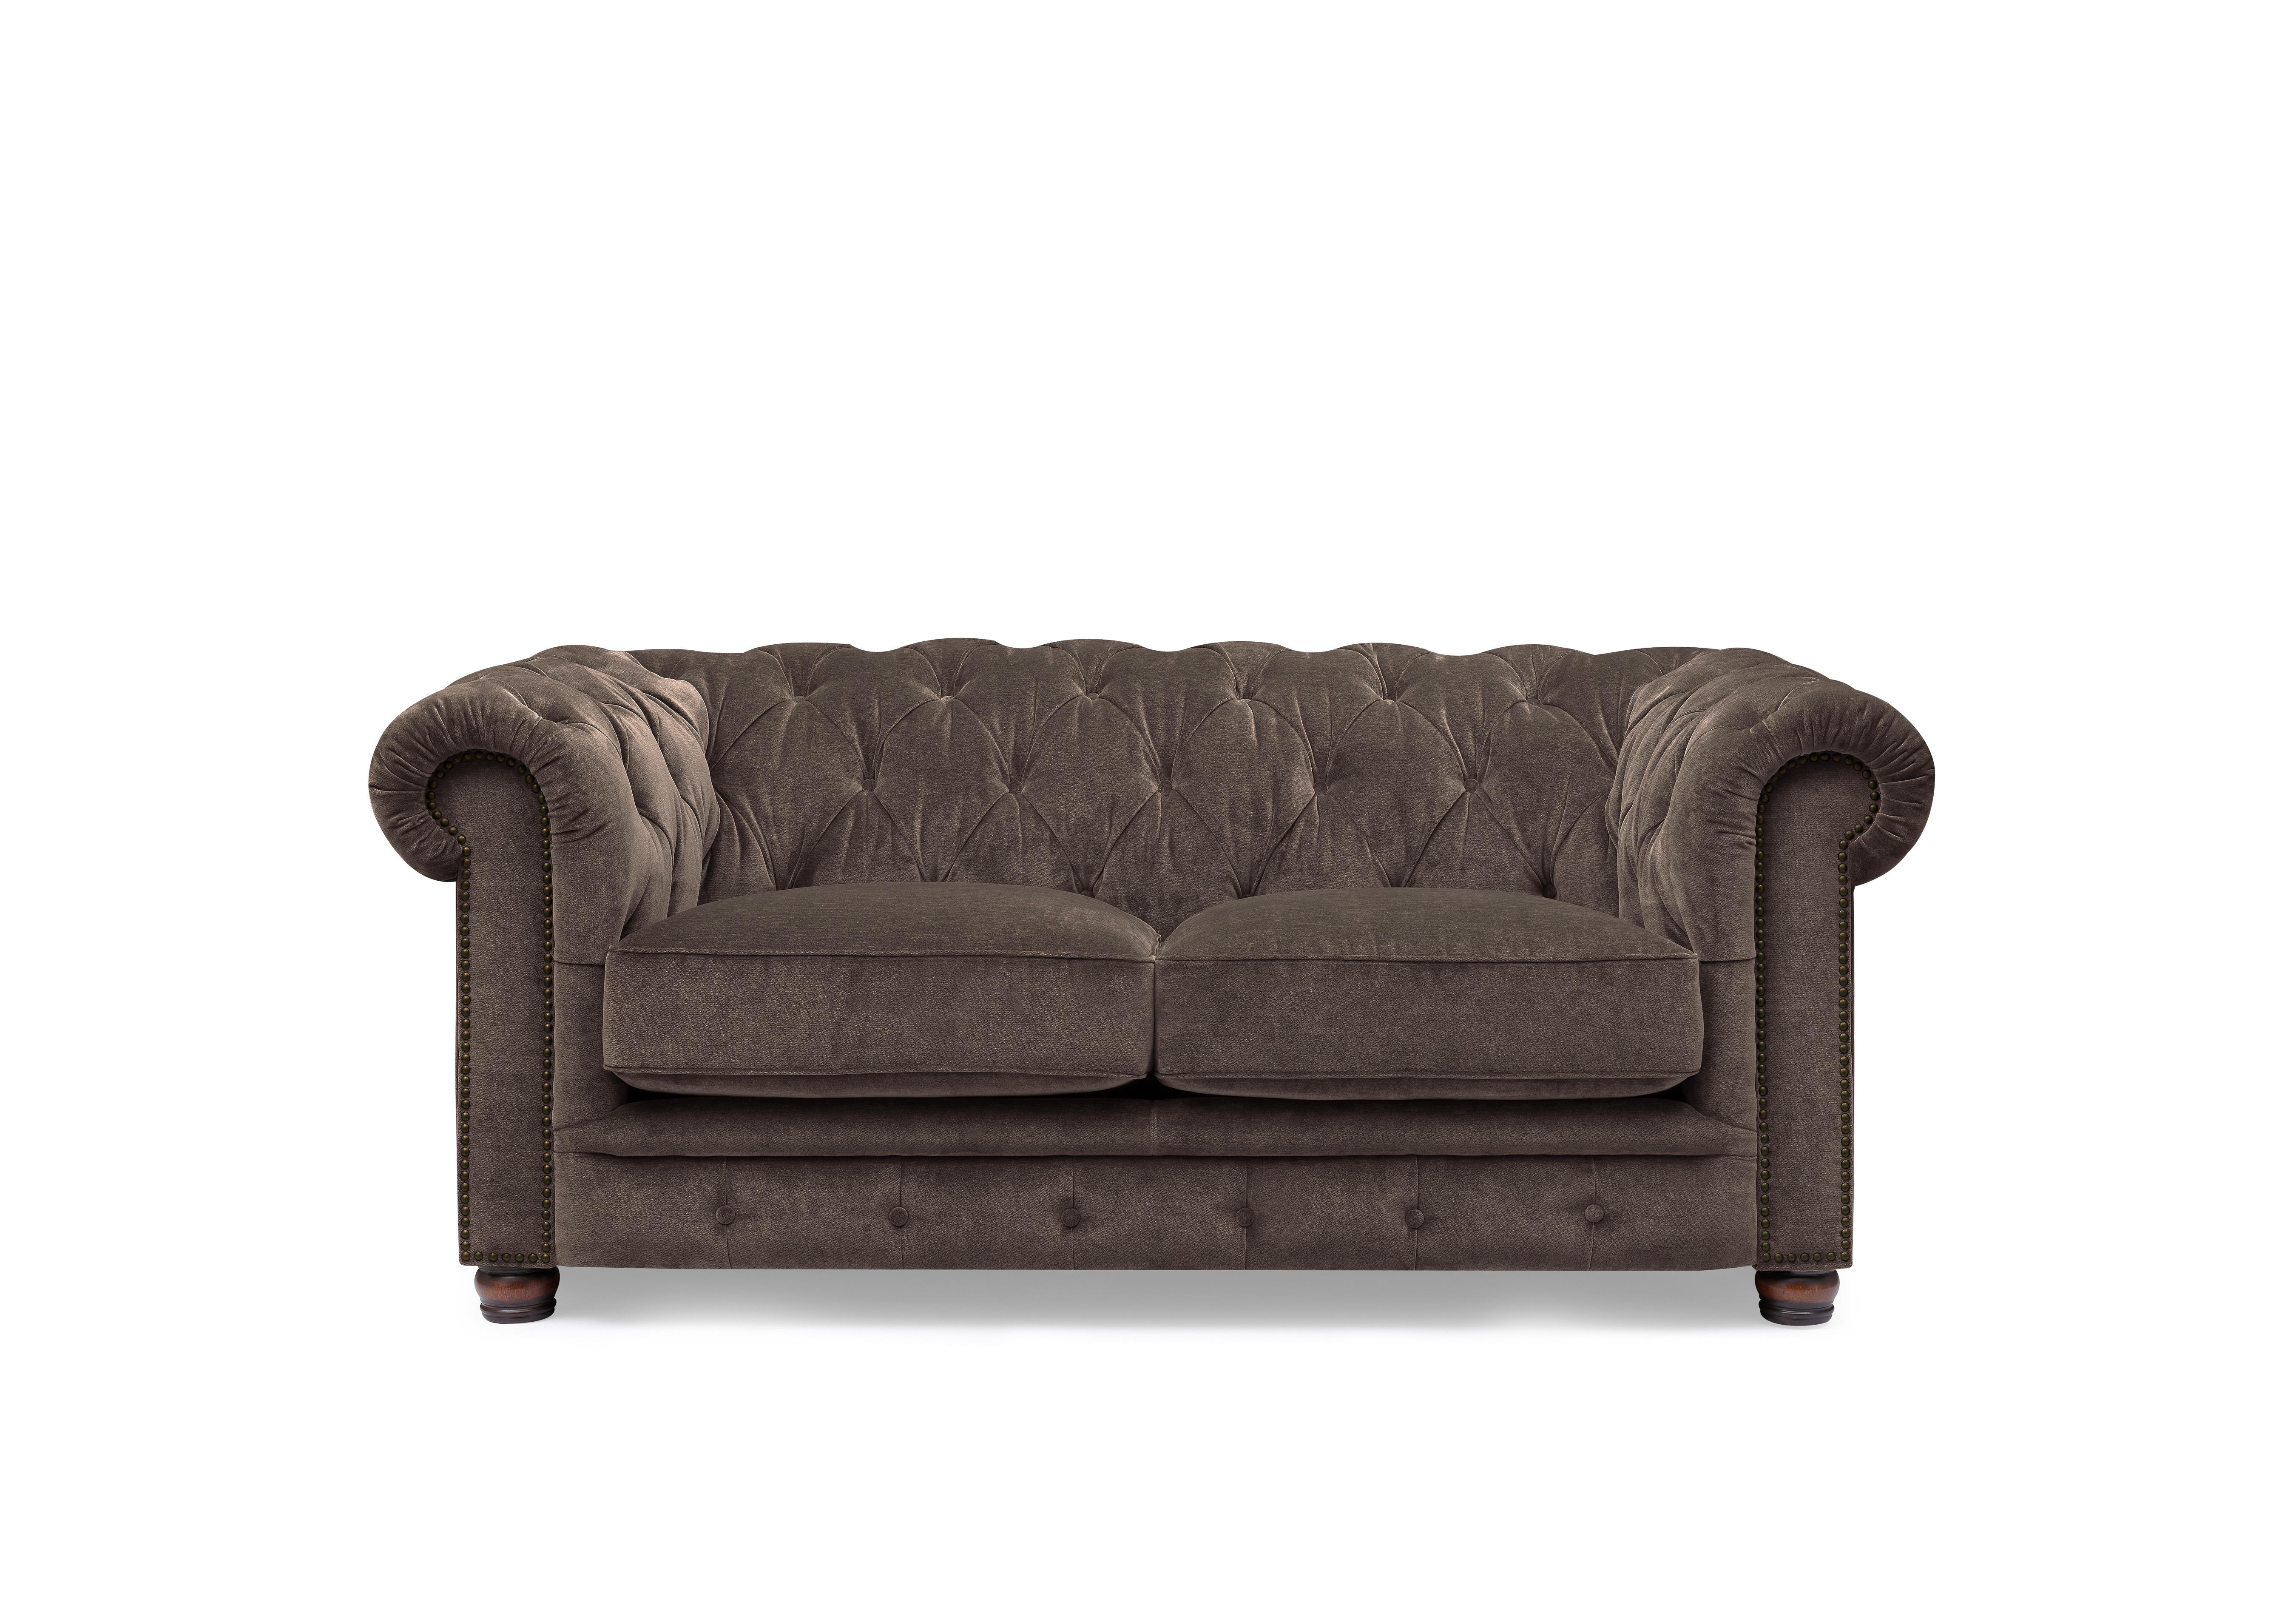 Shackleton 2 Seater Fabric Chesterfield Sofa with USB-C in X3y1-W020 Brindle on Furniture Village